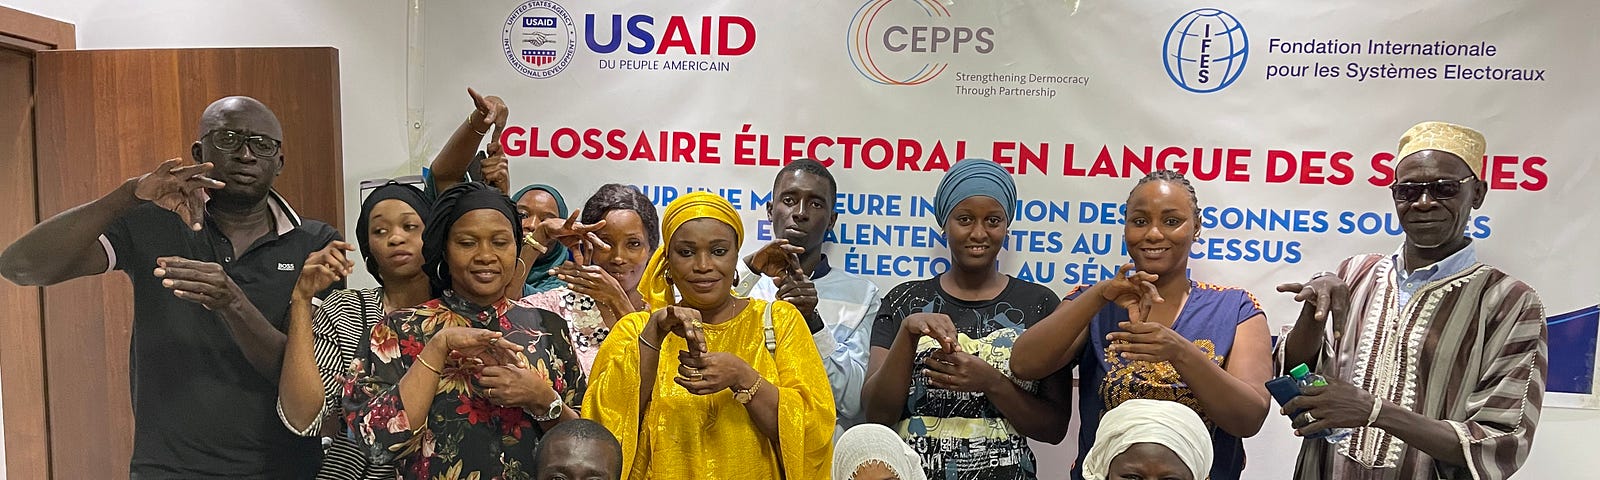 A group of people in front of a USAID banner pose for a picture while using sign language to display the word “vote” with their hands.